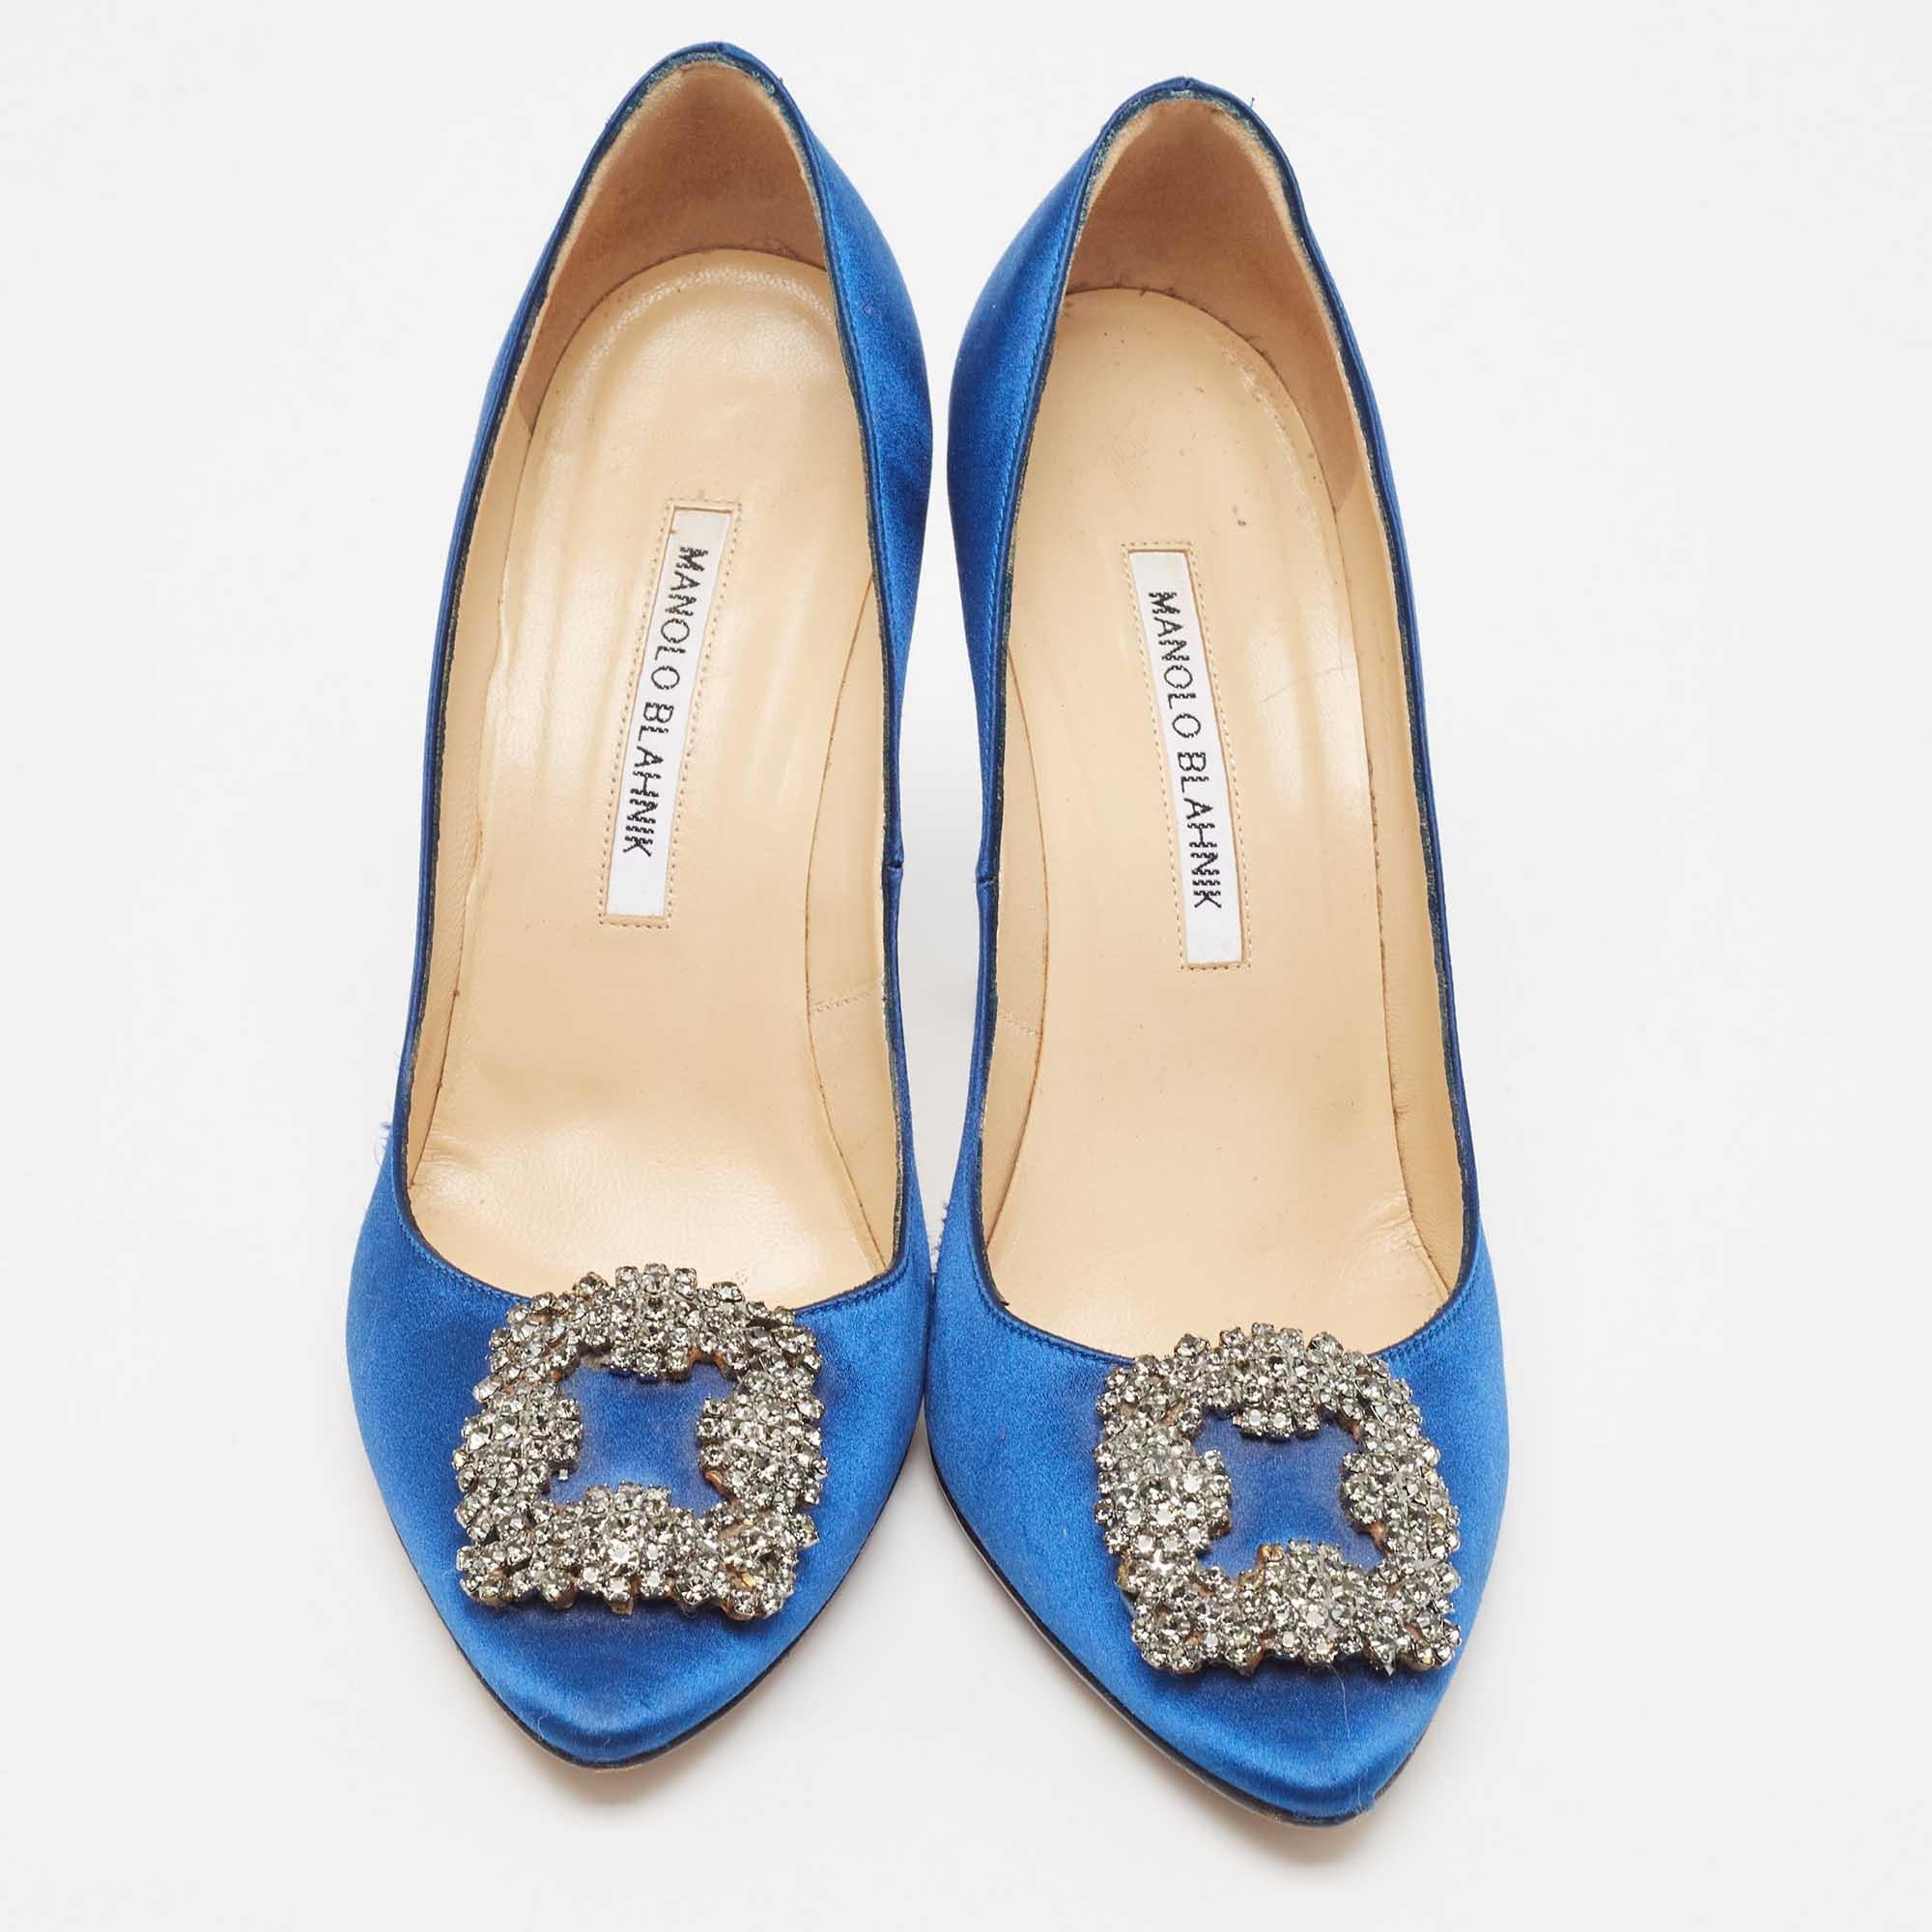 Complement your well-put-together outfit with these authentic Manolo Blahnik shoes. Timeless and classy, they have an amazing construction for enduring quality and comfortable fit.

